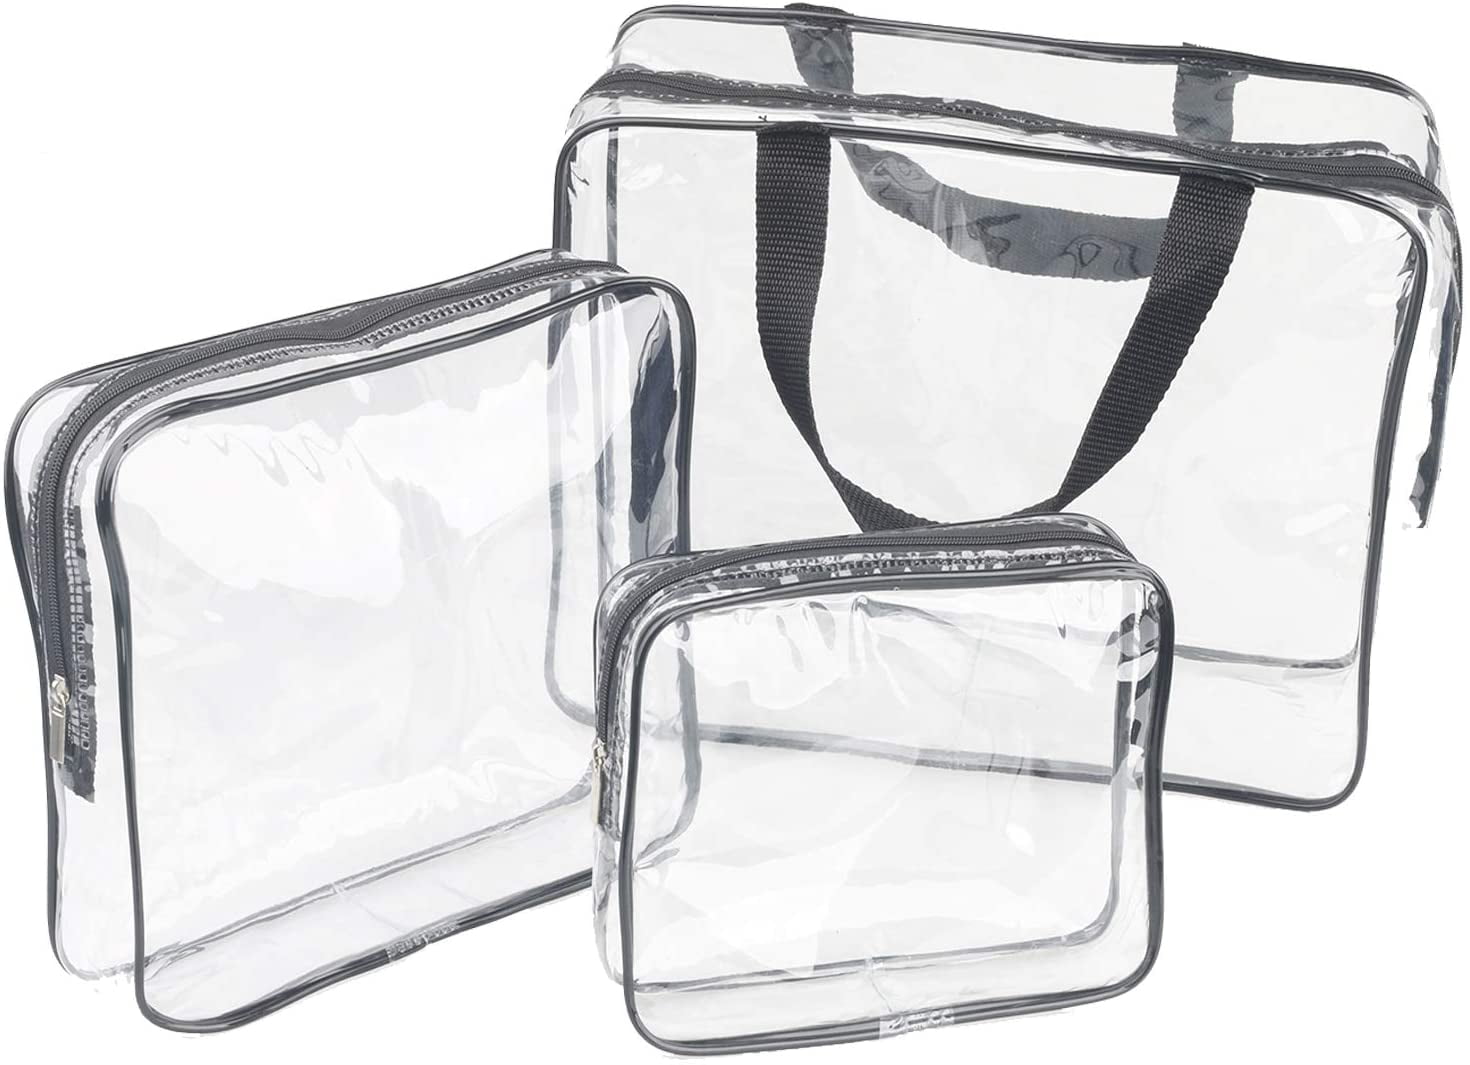 Okuna Outpost Set of 4 TSA Clear Toiletry Bags with Empty TSA Approved Travel Containers for Packing, Assorted Colors, Size: 7.5 x 2.5 x 5.5